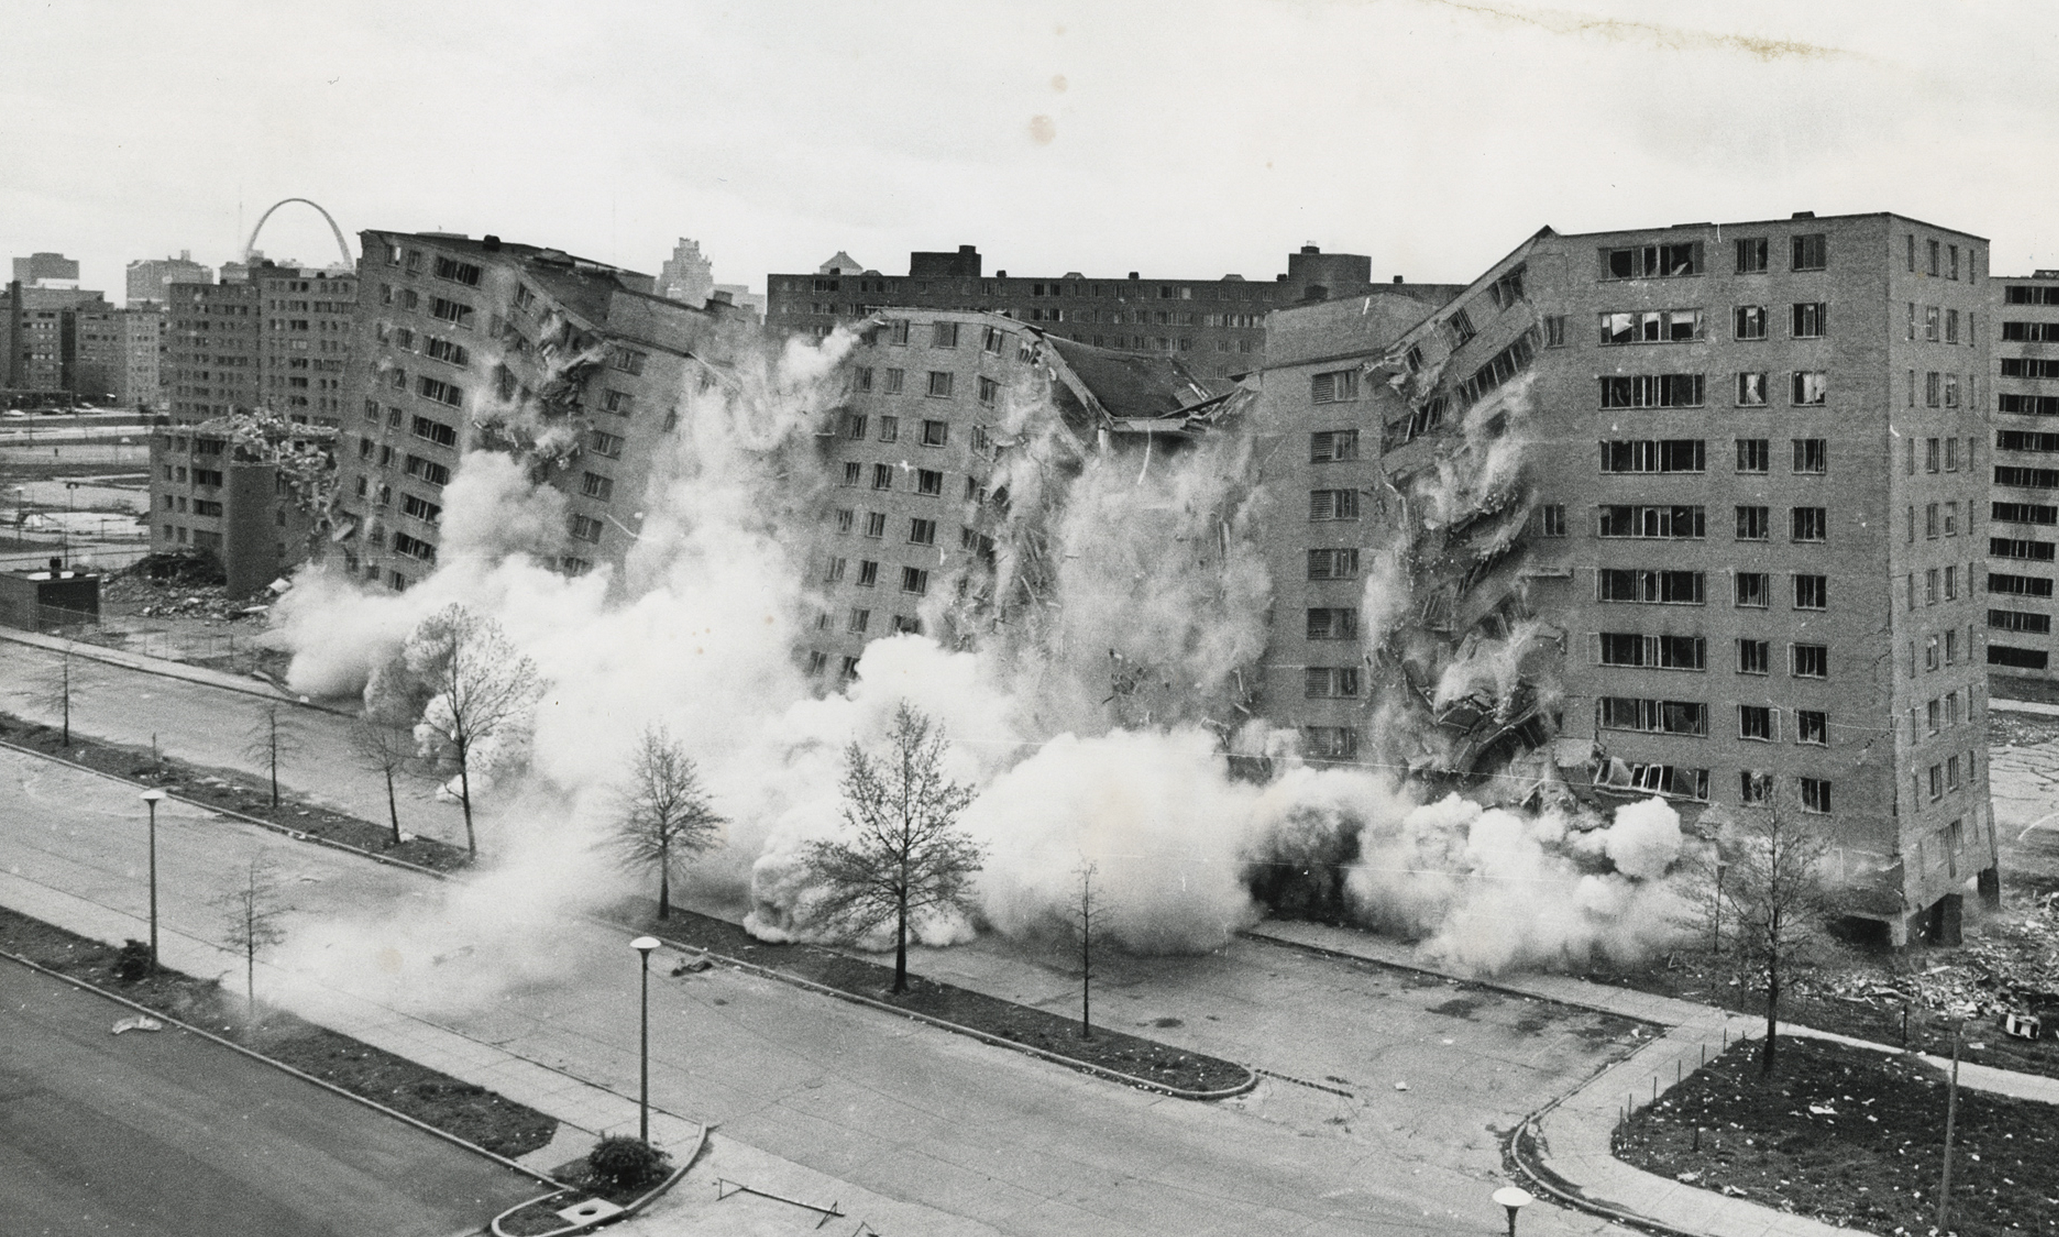  April 1972. The second, widely televised demolition of a Pruitt-Igoe building that followed the March 16 demolition